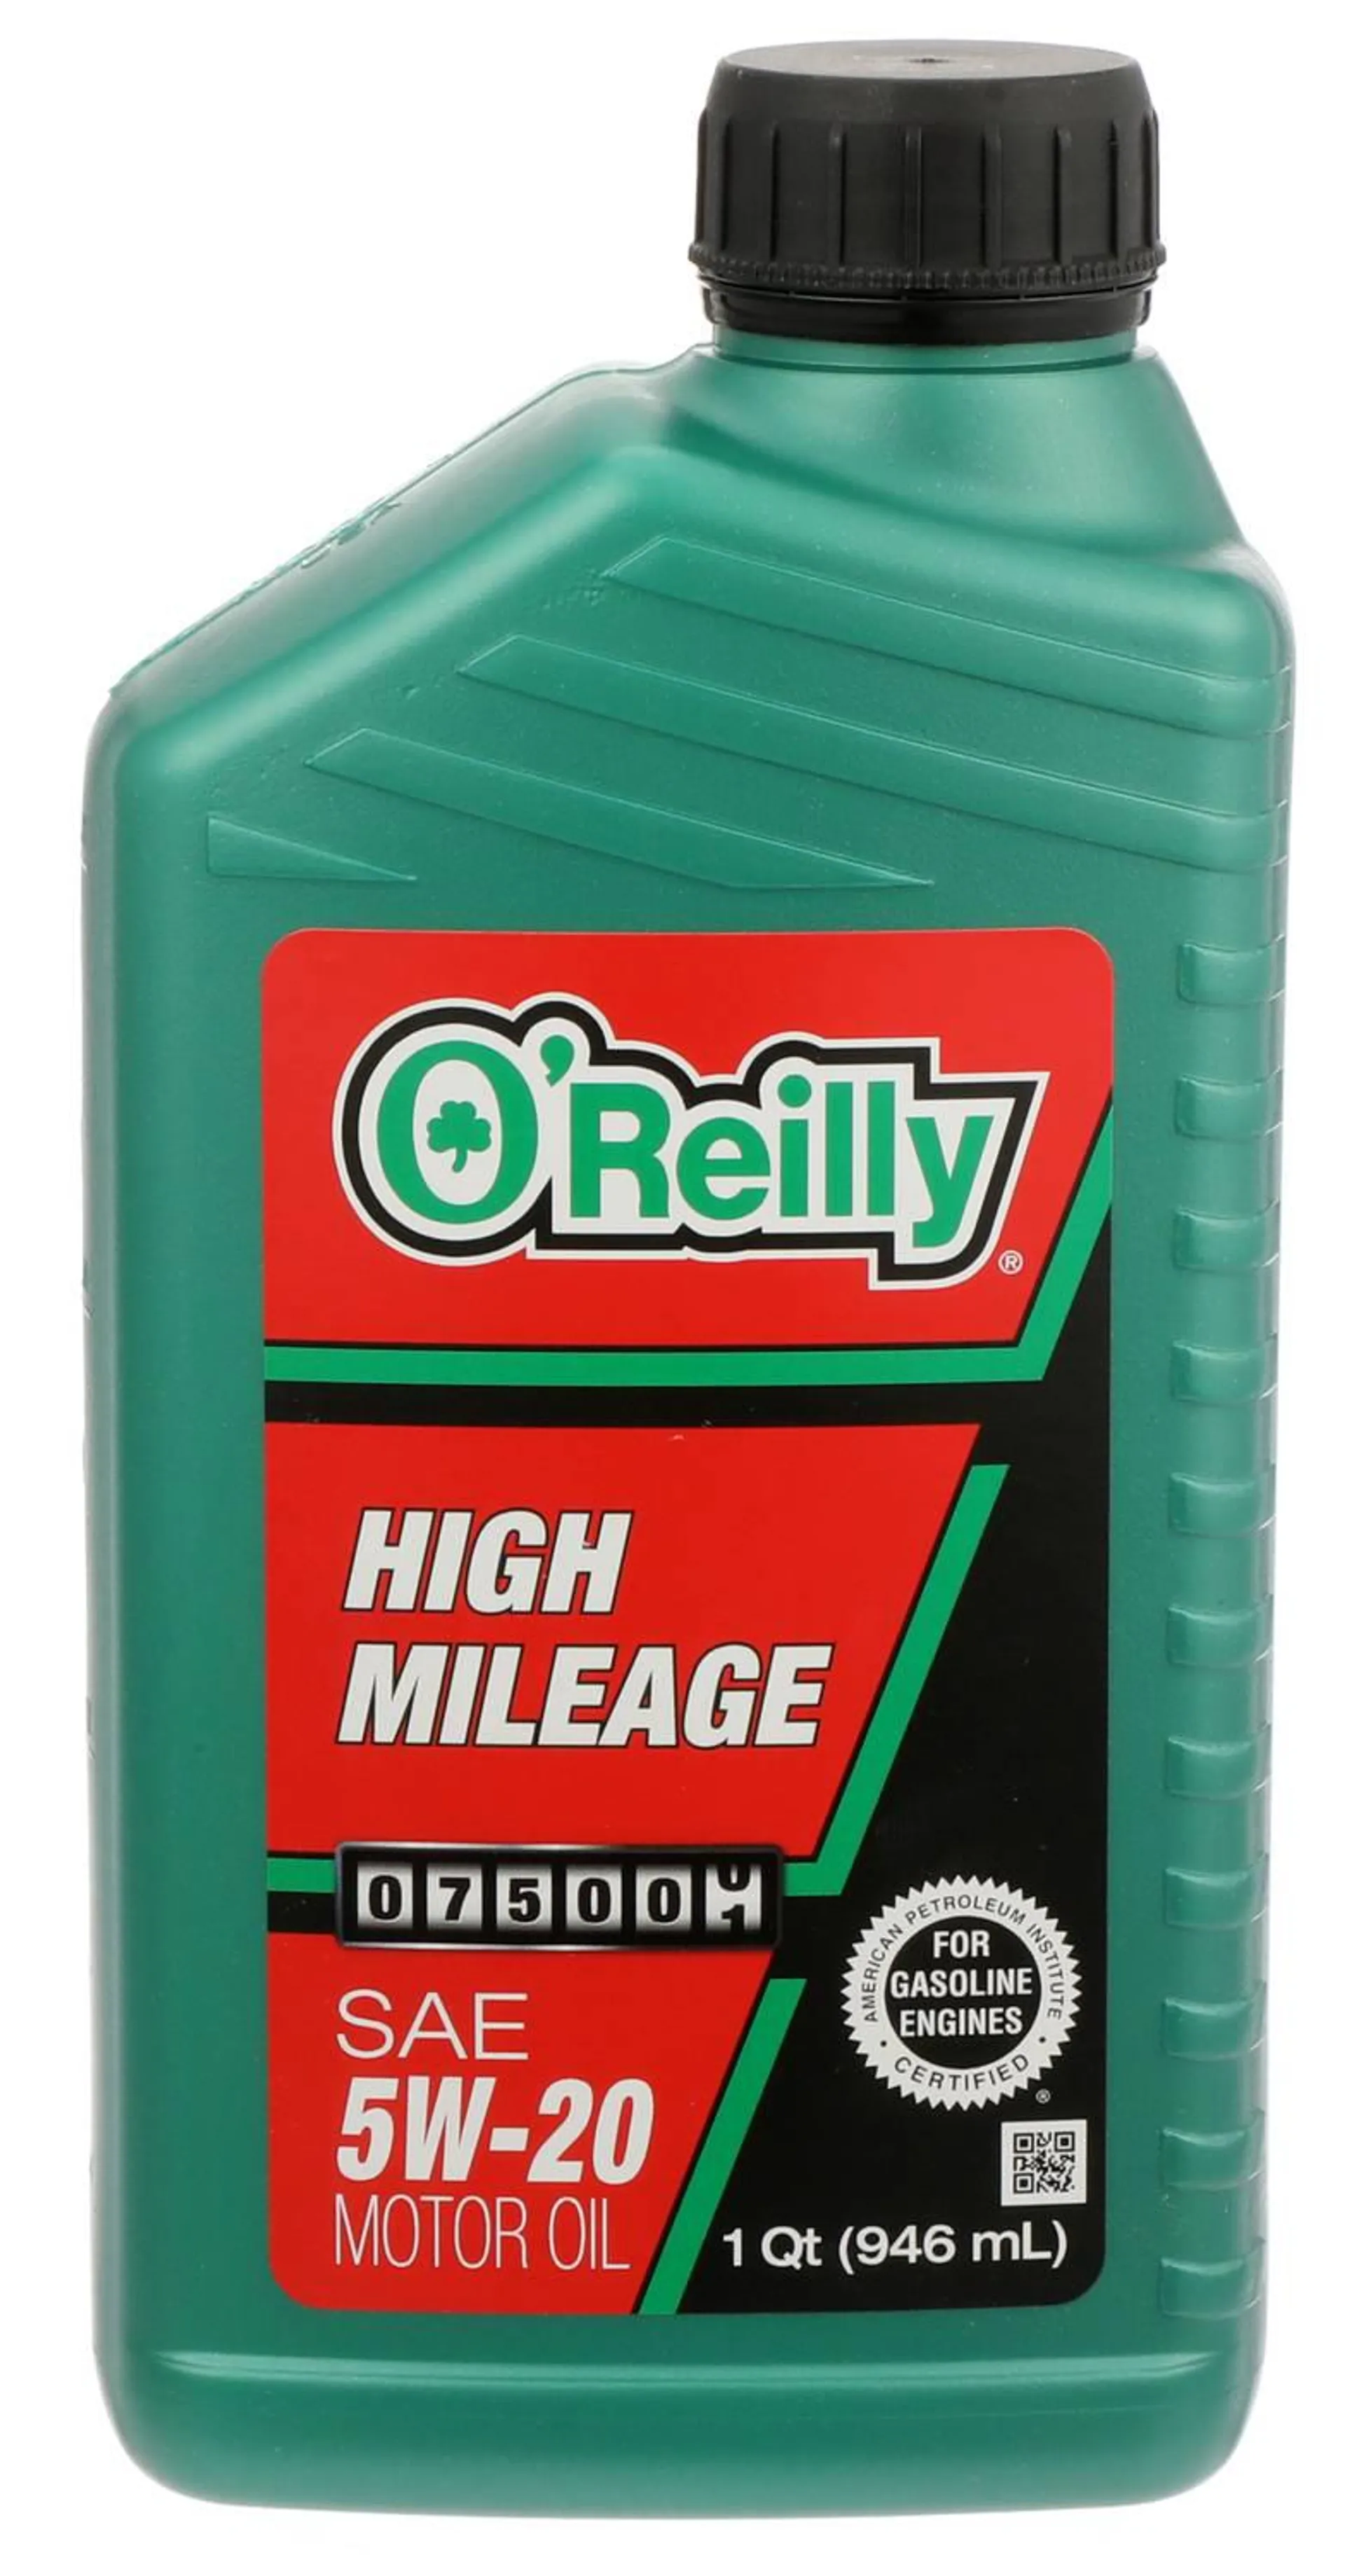 O'Reilly Synthetic Blend High Mileage Motor Oil 5W-20 1 Quart - HIGHMILE5-20